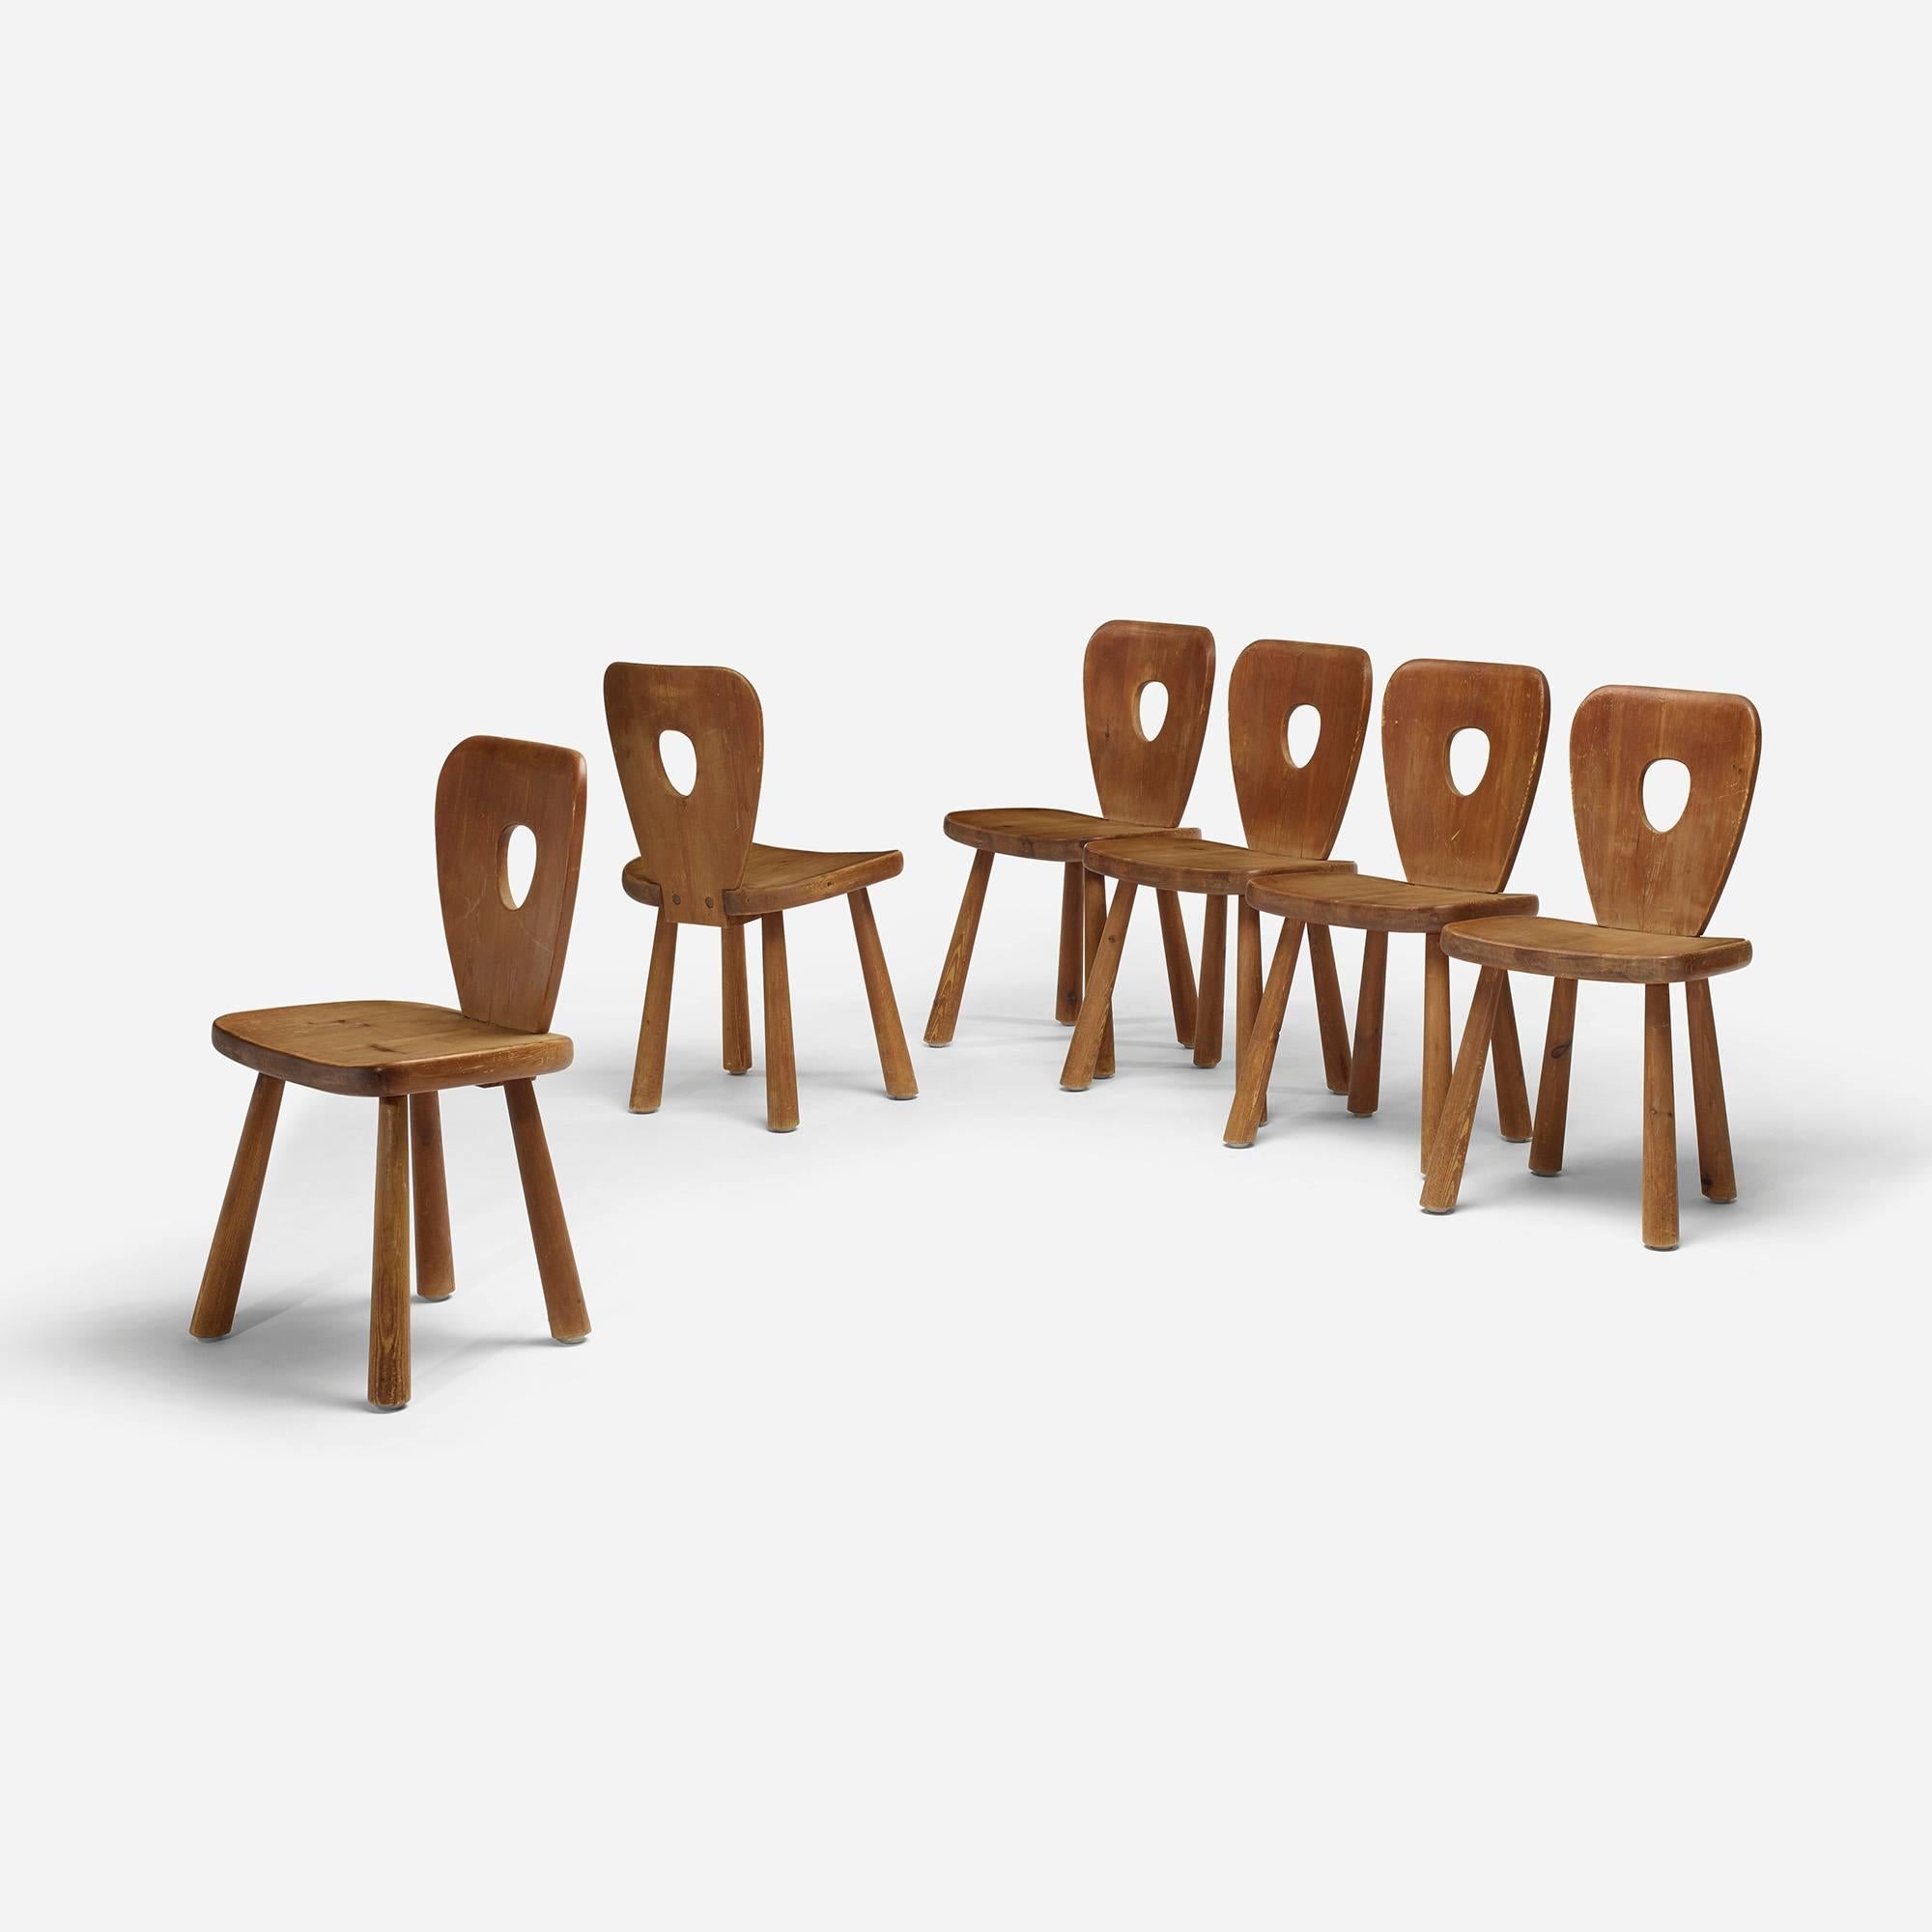 These chairs were used in the rectory of the Trinity Church in the town of Arvika, Sweden where designer and sculptor Bo Fjaestad co-founded the Arvika Crafts studio.

Provenance: Trinity Church, Arvika, Sweden Private Collection